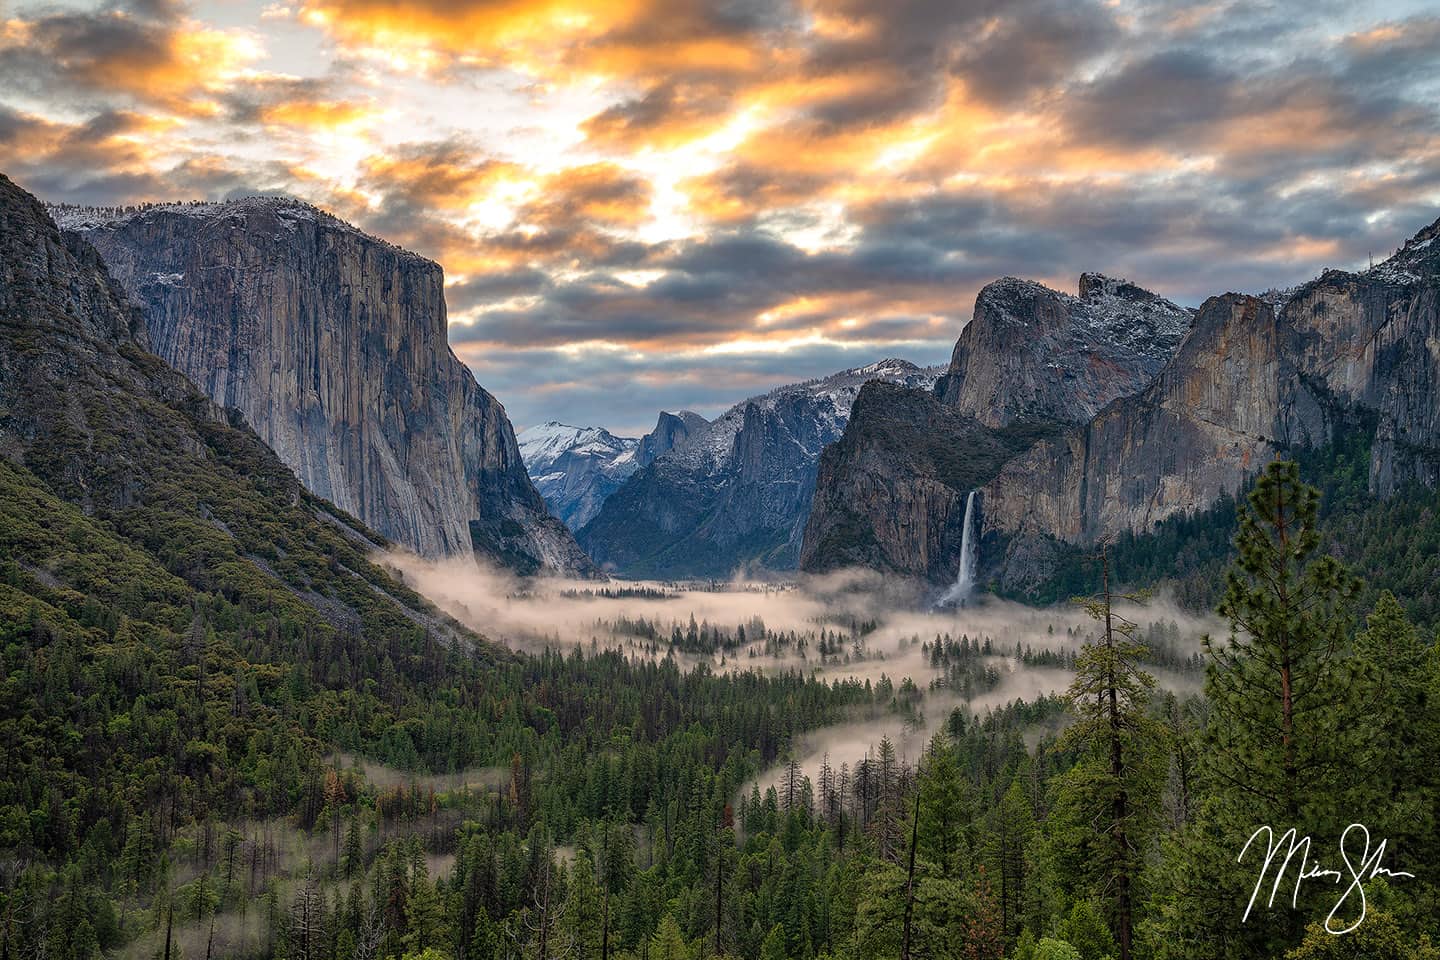 Fog drifts in and out of the trees below Bridalviel Falls and the icons of Yosemite Valley